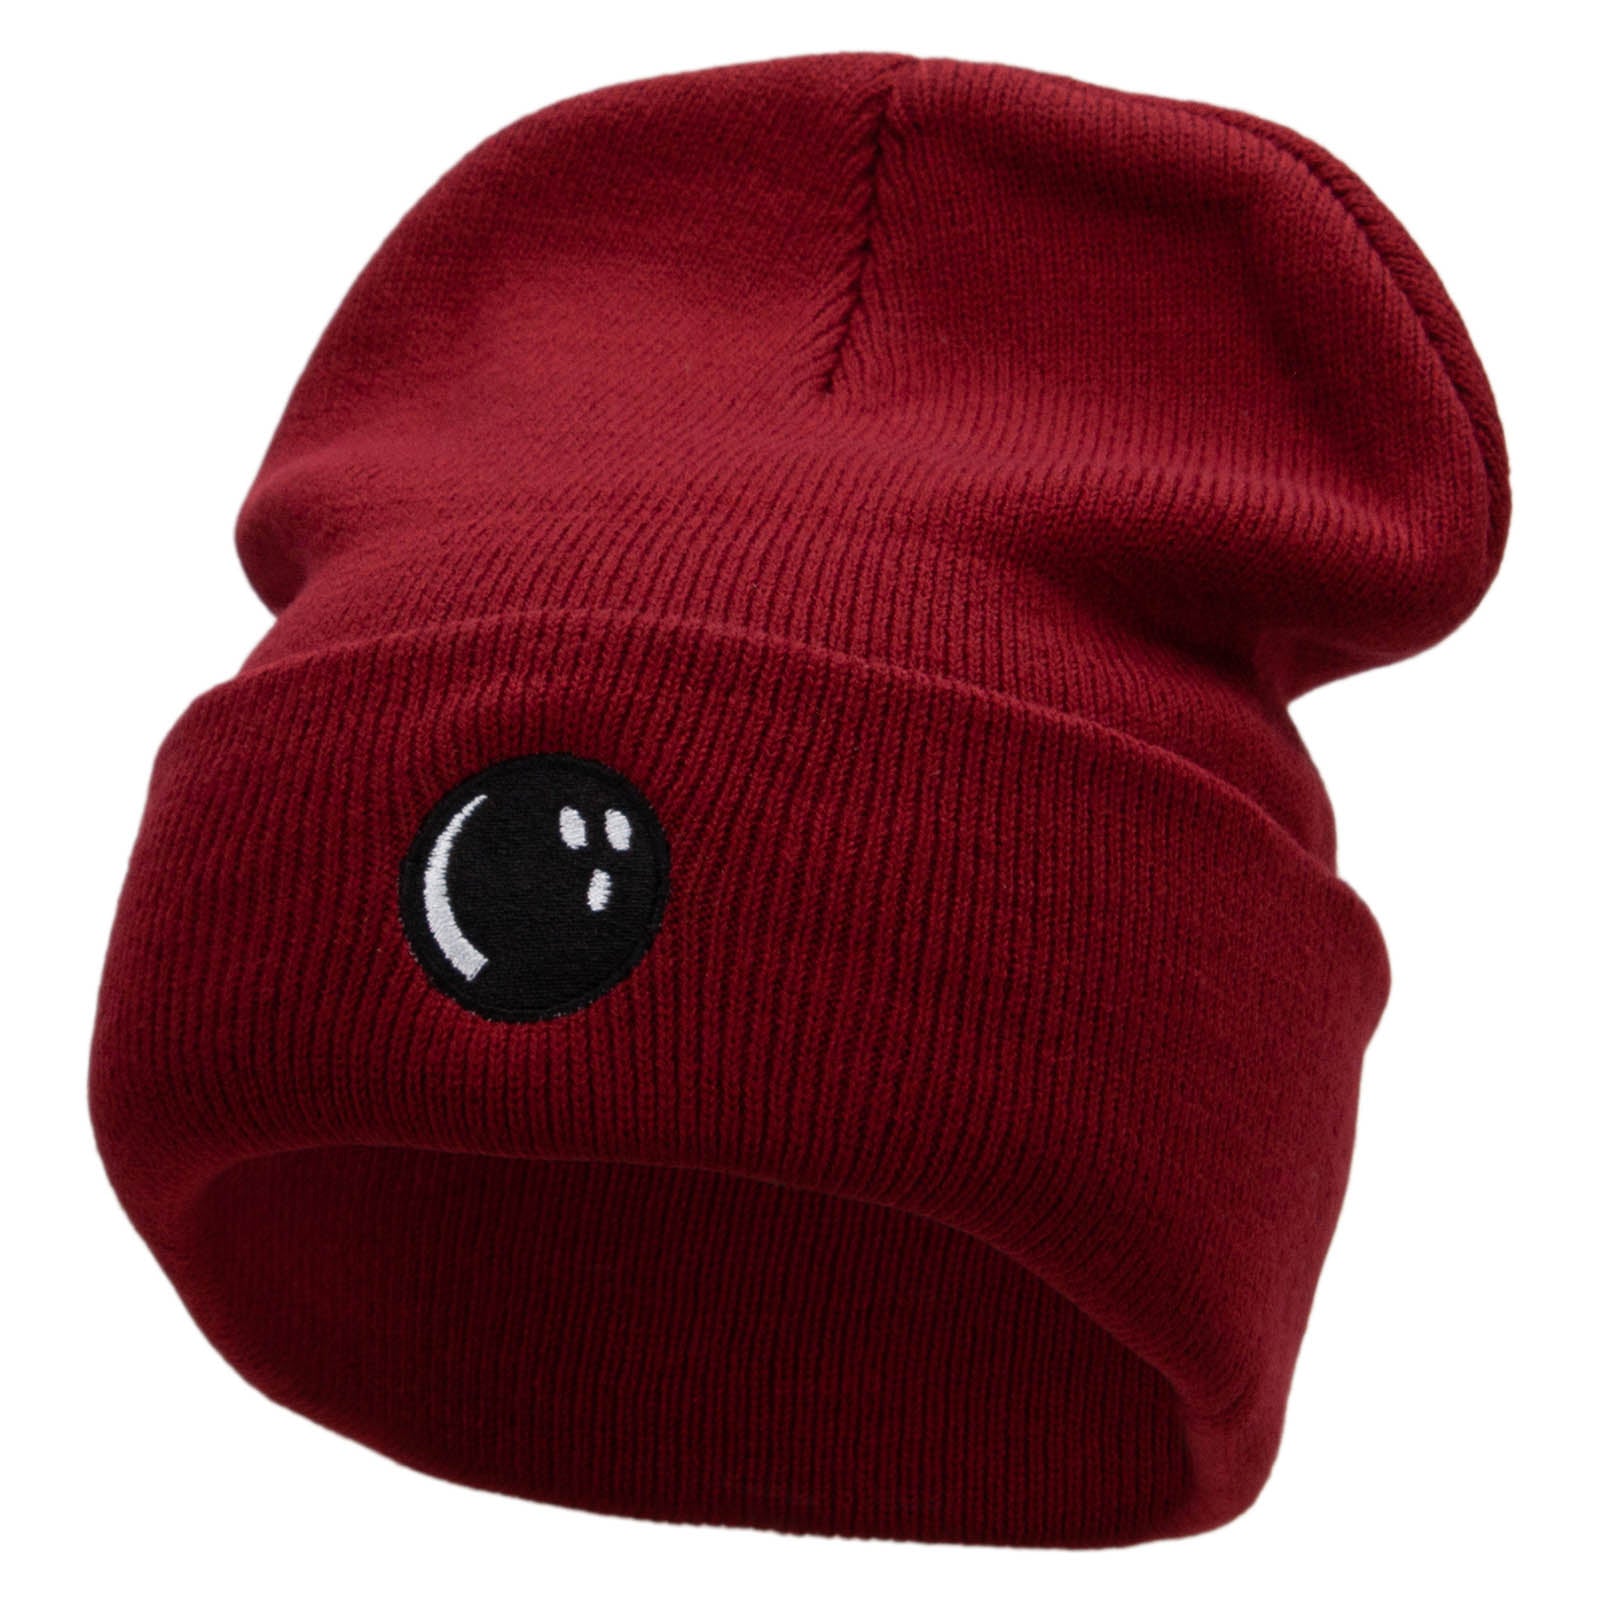 Bowlers Ball Embroidered 12 Inch Long Knitted Beanie - Maroon OSFM